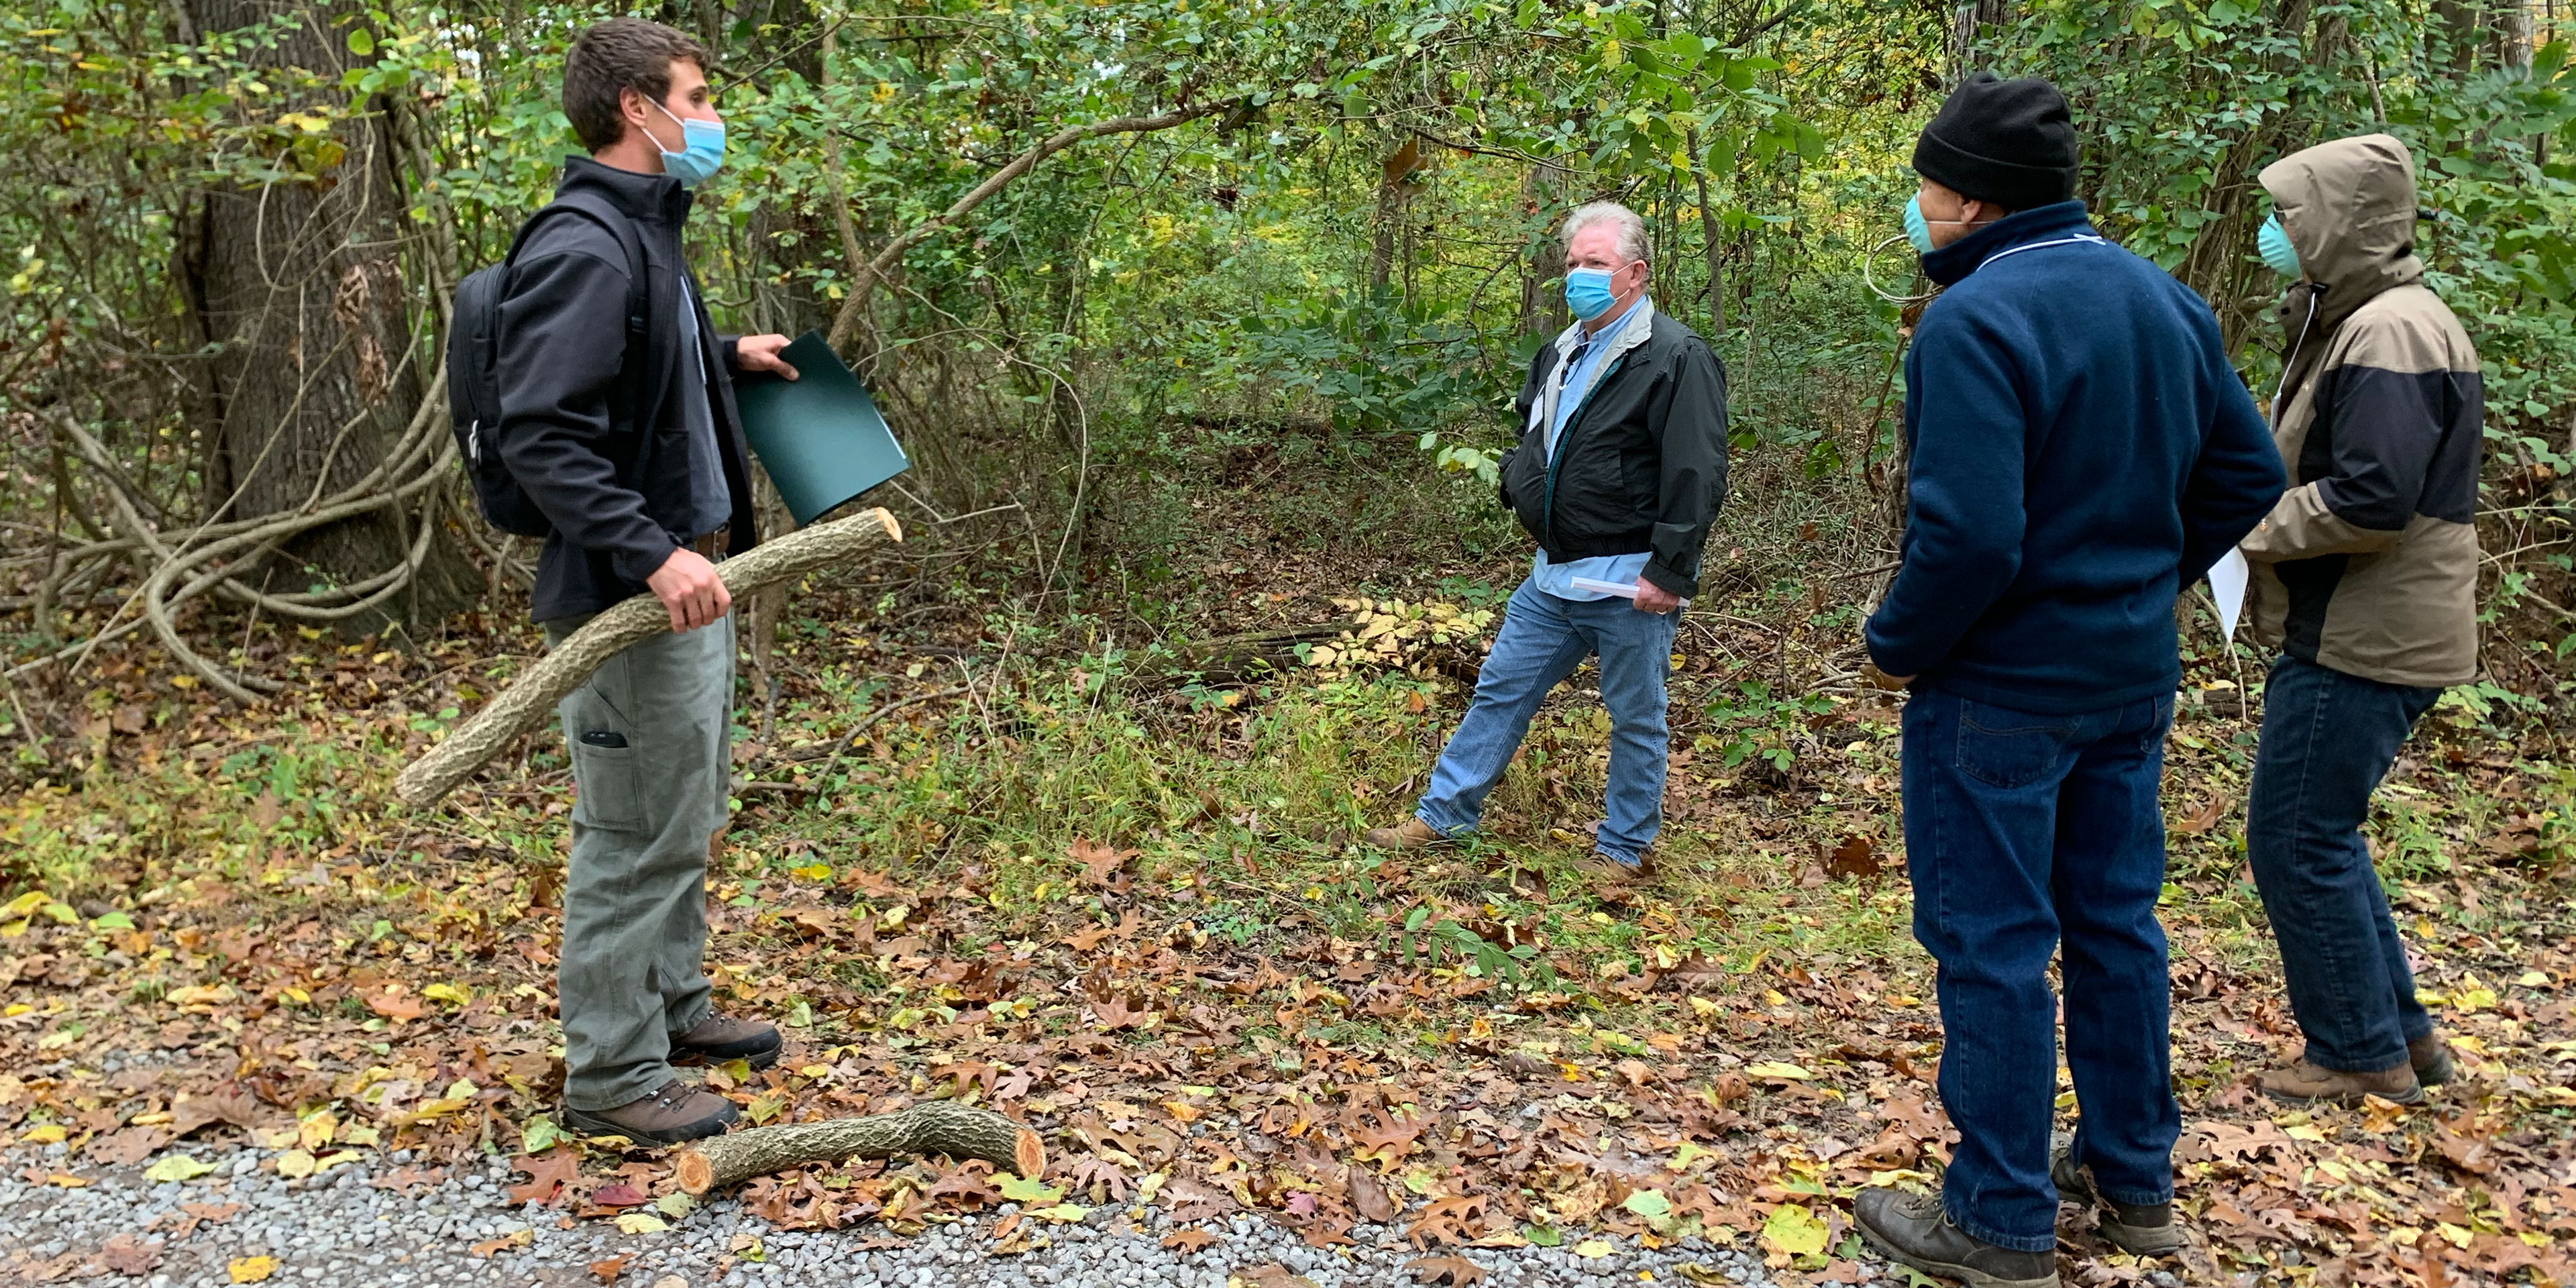 An instructor holding a three foot cut tree limb and folder standing with three participants wearing face coverings socially distanced outside between a road and forest.